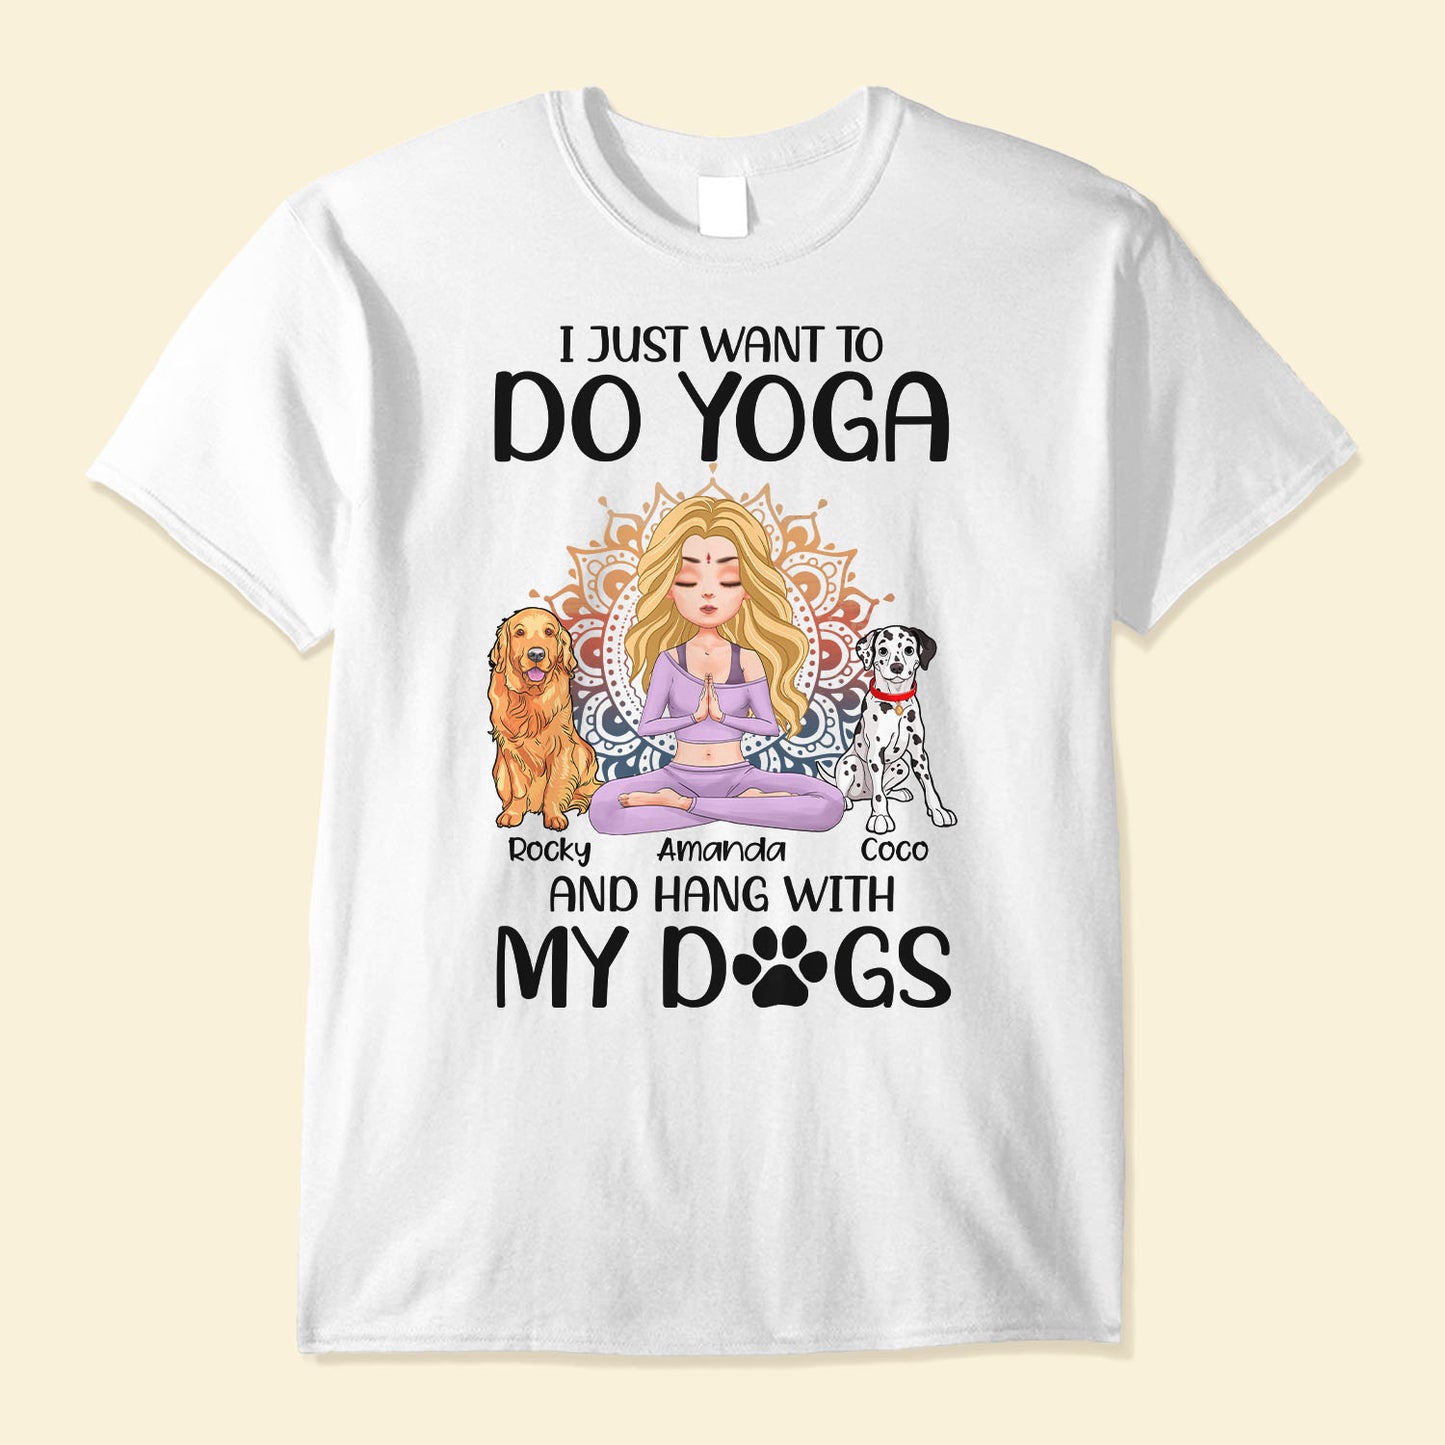 Yoga And Hang With My Dogs Personalized Shirt Gift For Yoga Lover Yoga Girl Illustration